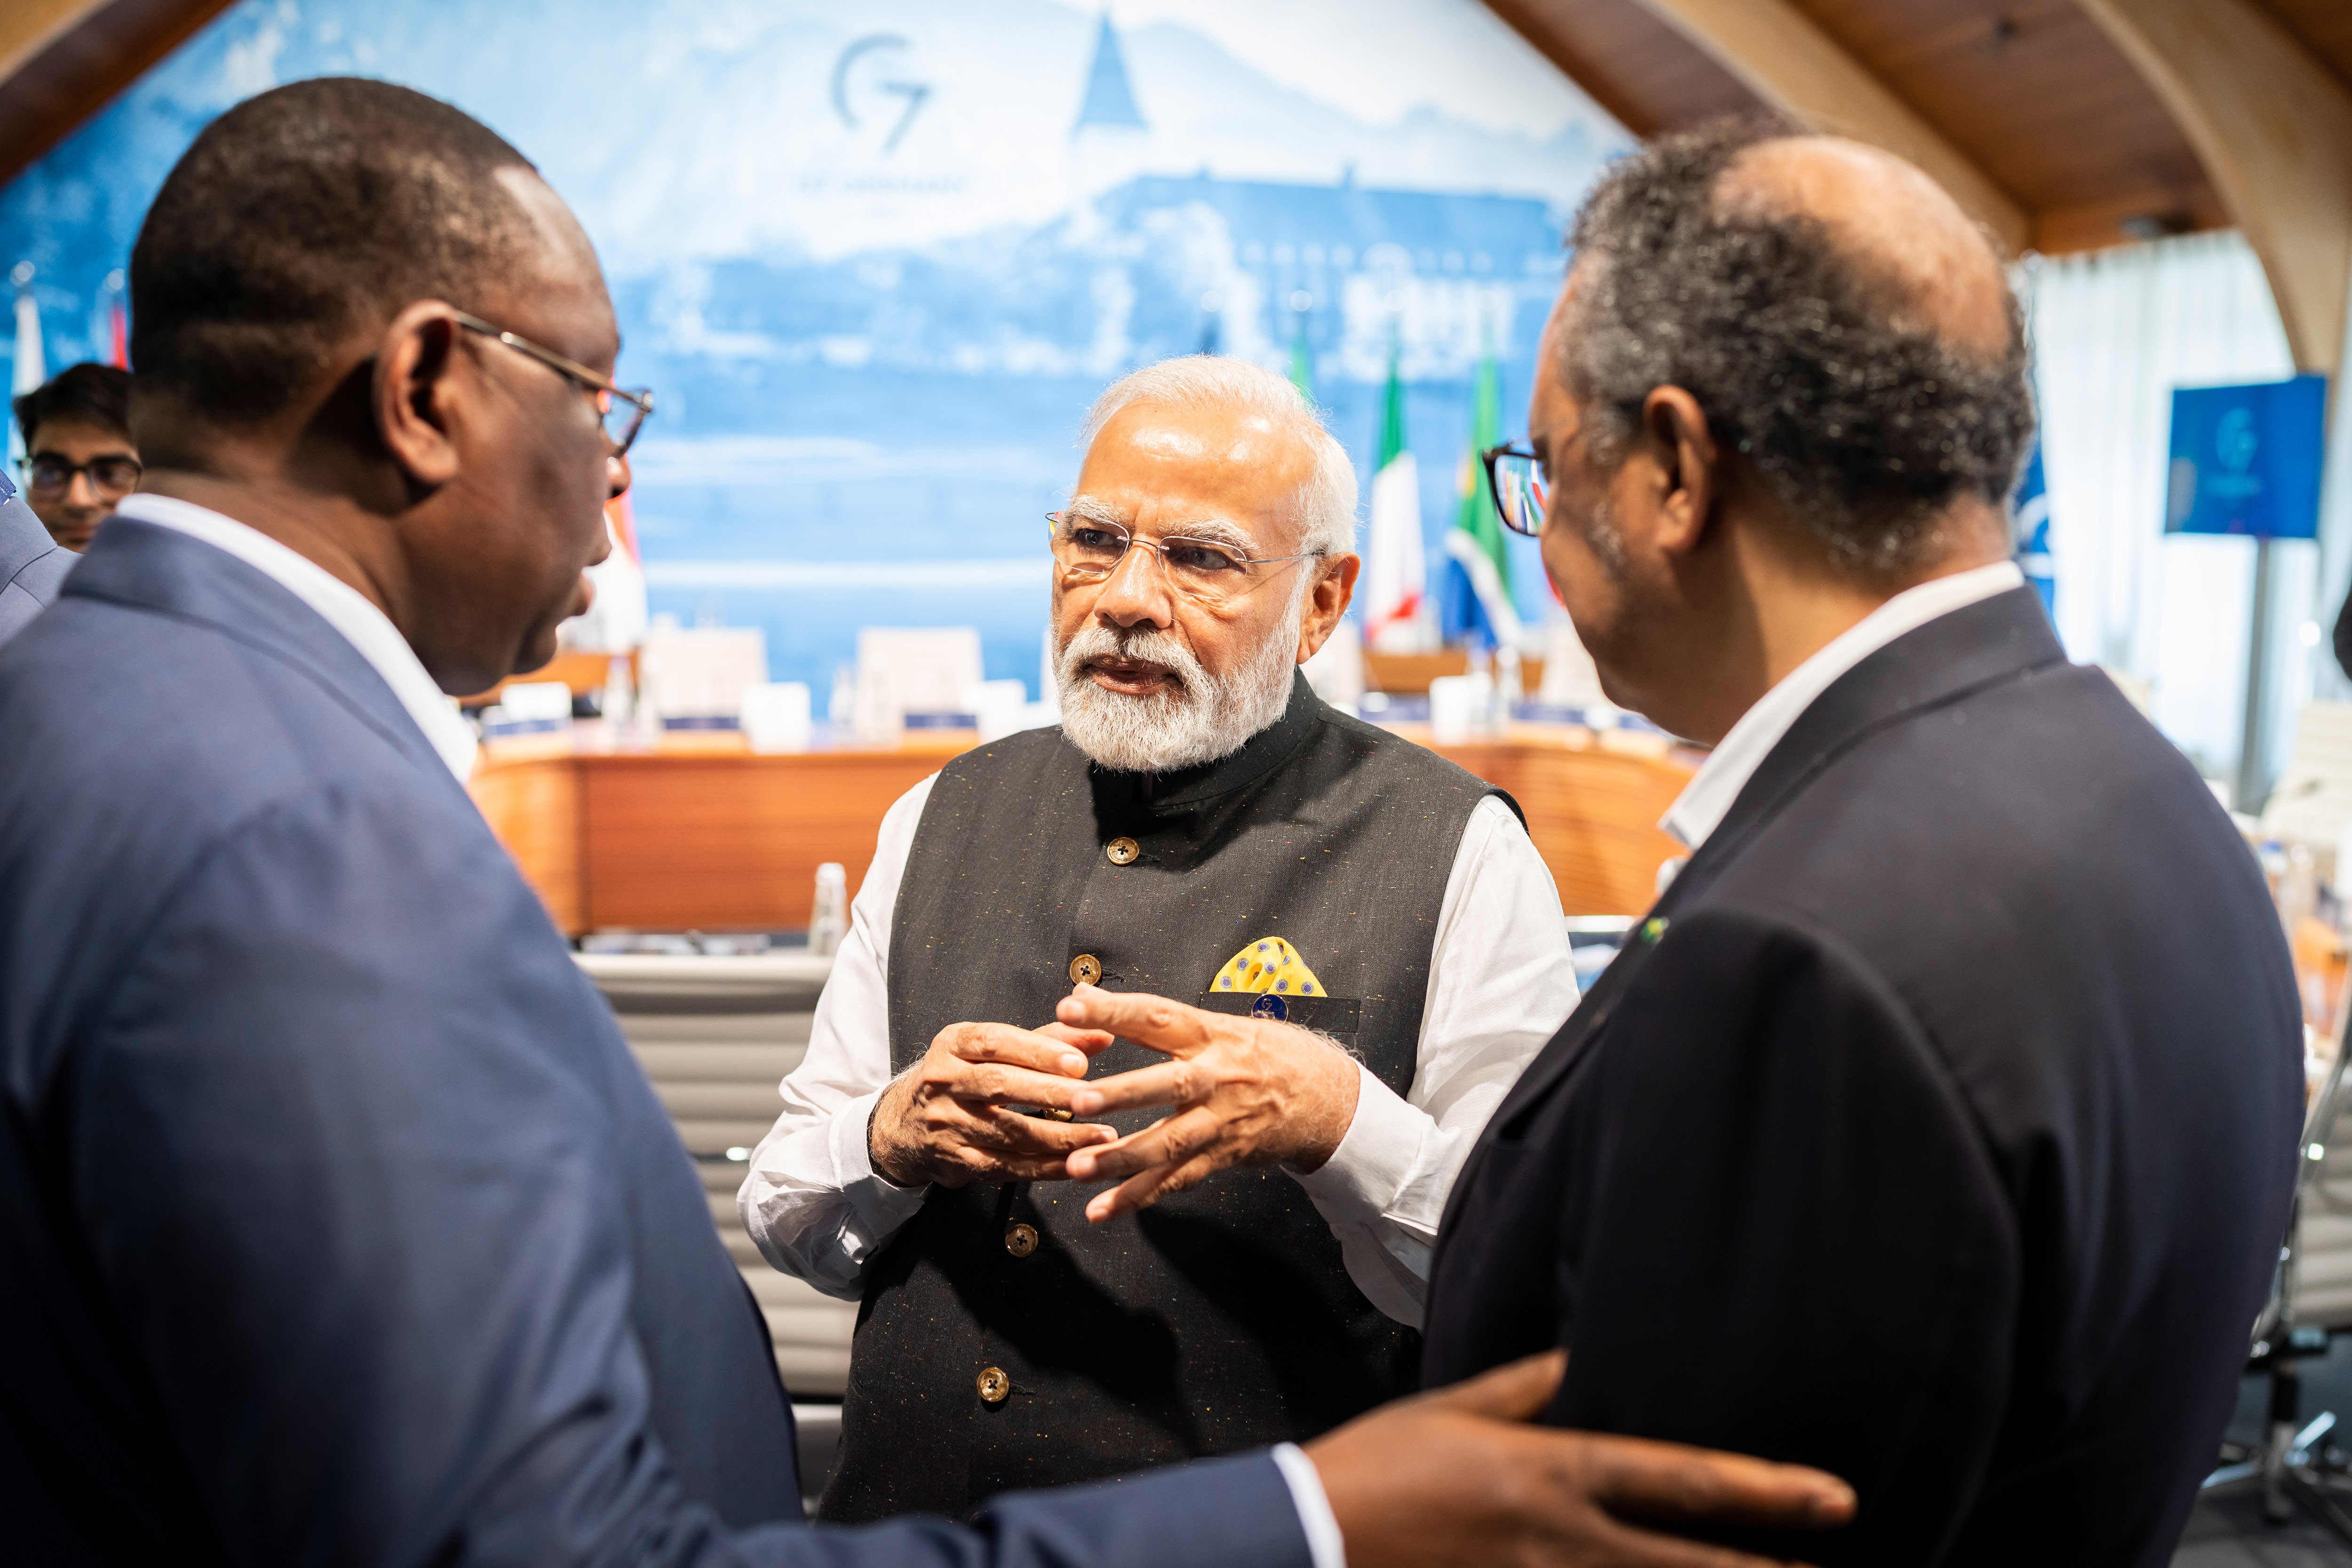 Before the start of the fifth working session. President Macky Sall of Senegal, currently chairperson of the African Union, Prime Minister Narendra Modi of India and Director-General of the World Health Organization Tedros Adhanom Ghebreyesus.